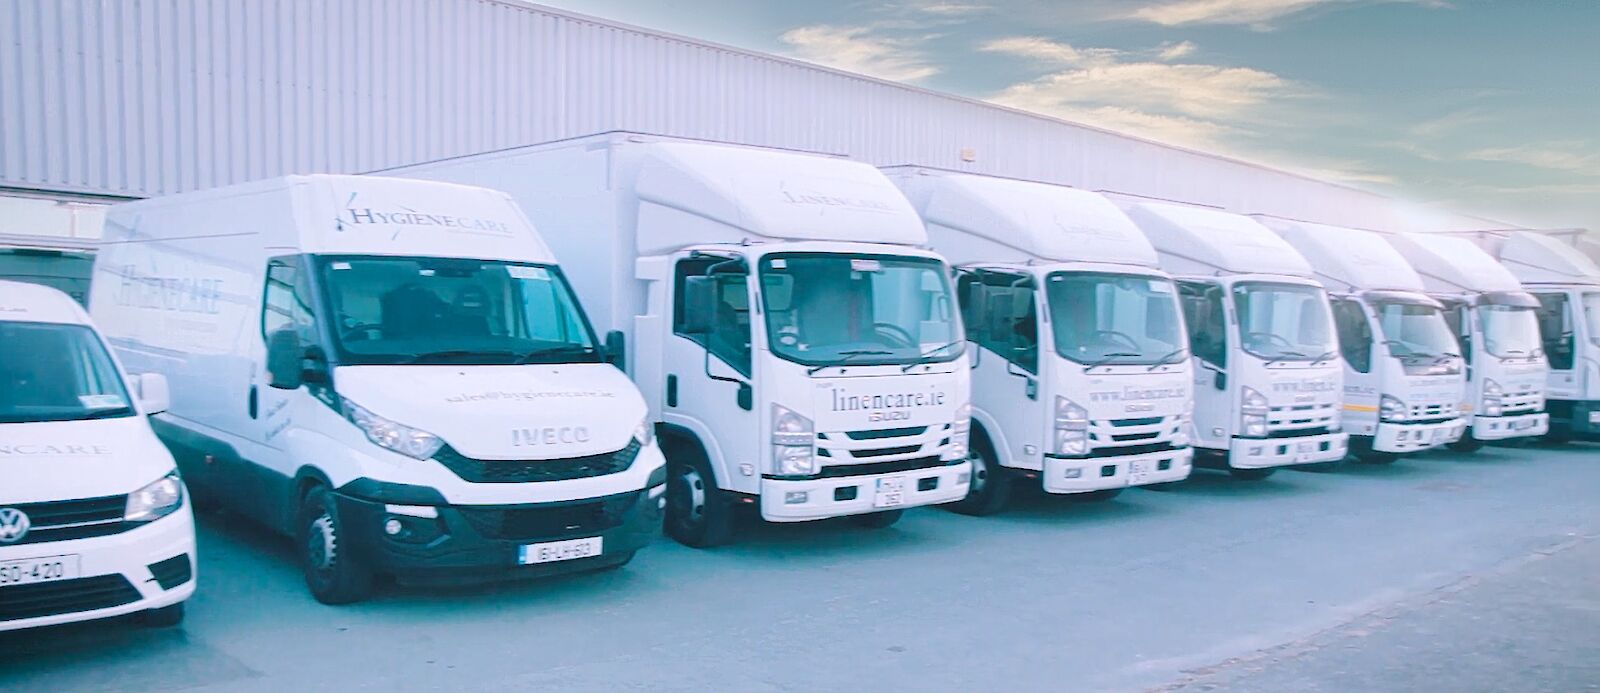 <p>Linencare's large fleet of new delivery trucks</p> 